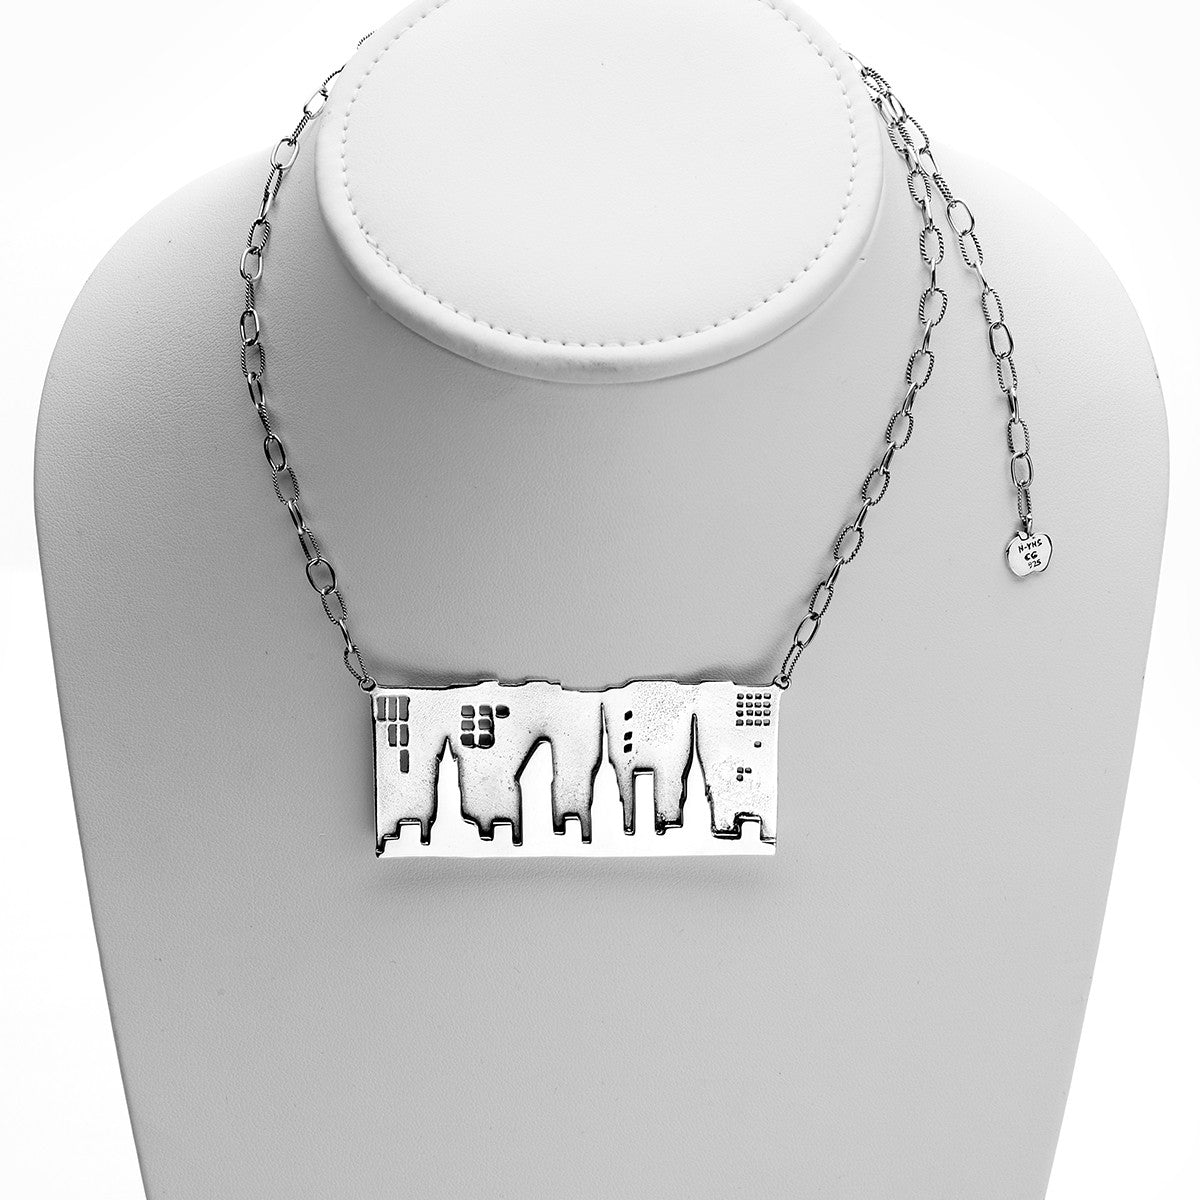 NYC Skyline The City That Never Sleeps Sterling Silver Necklace - Cynthia Gale New York - 1